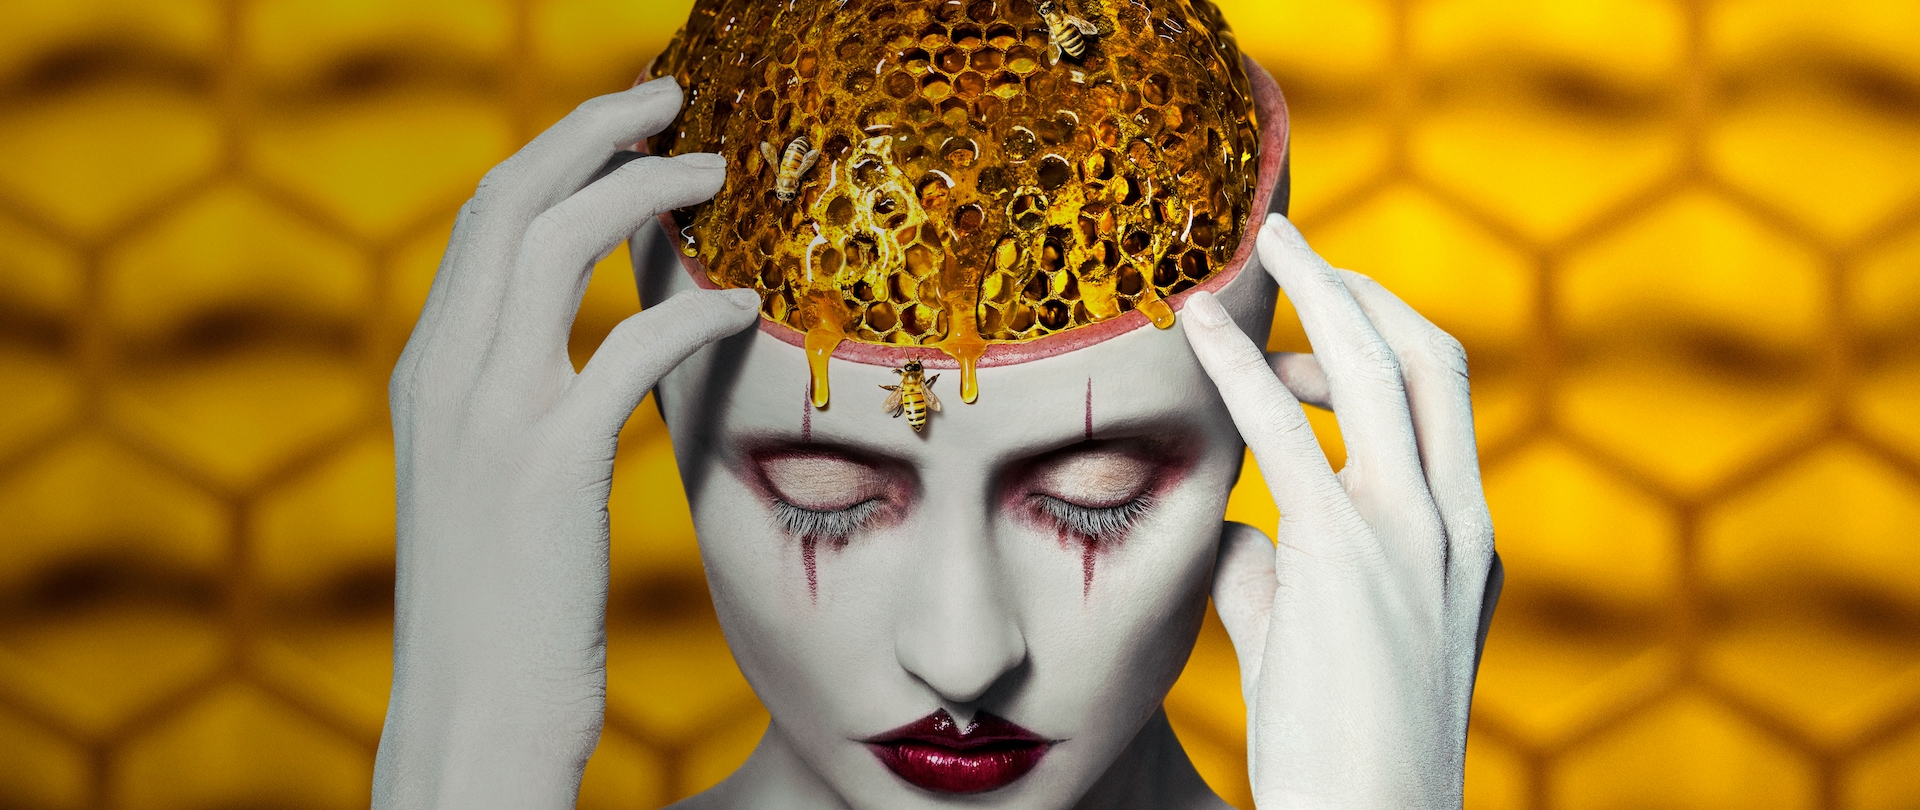 Woman in white body makeup and dark red lips touching crown of her open head that is showing a honeycomb "brain" with bees